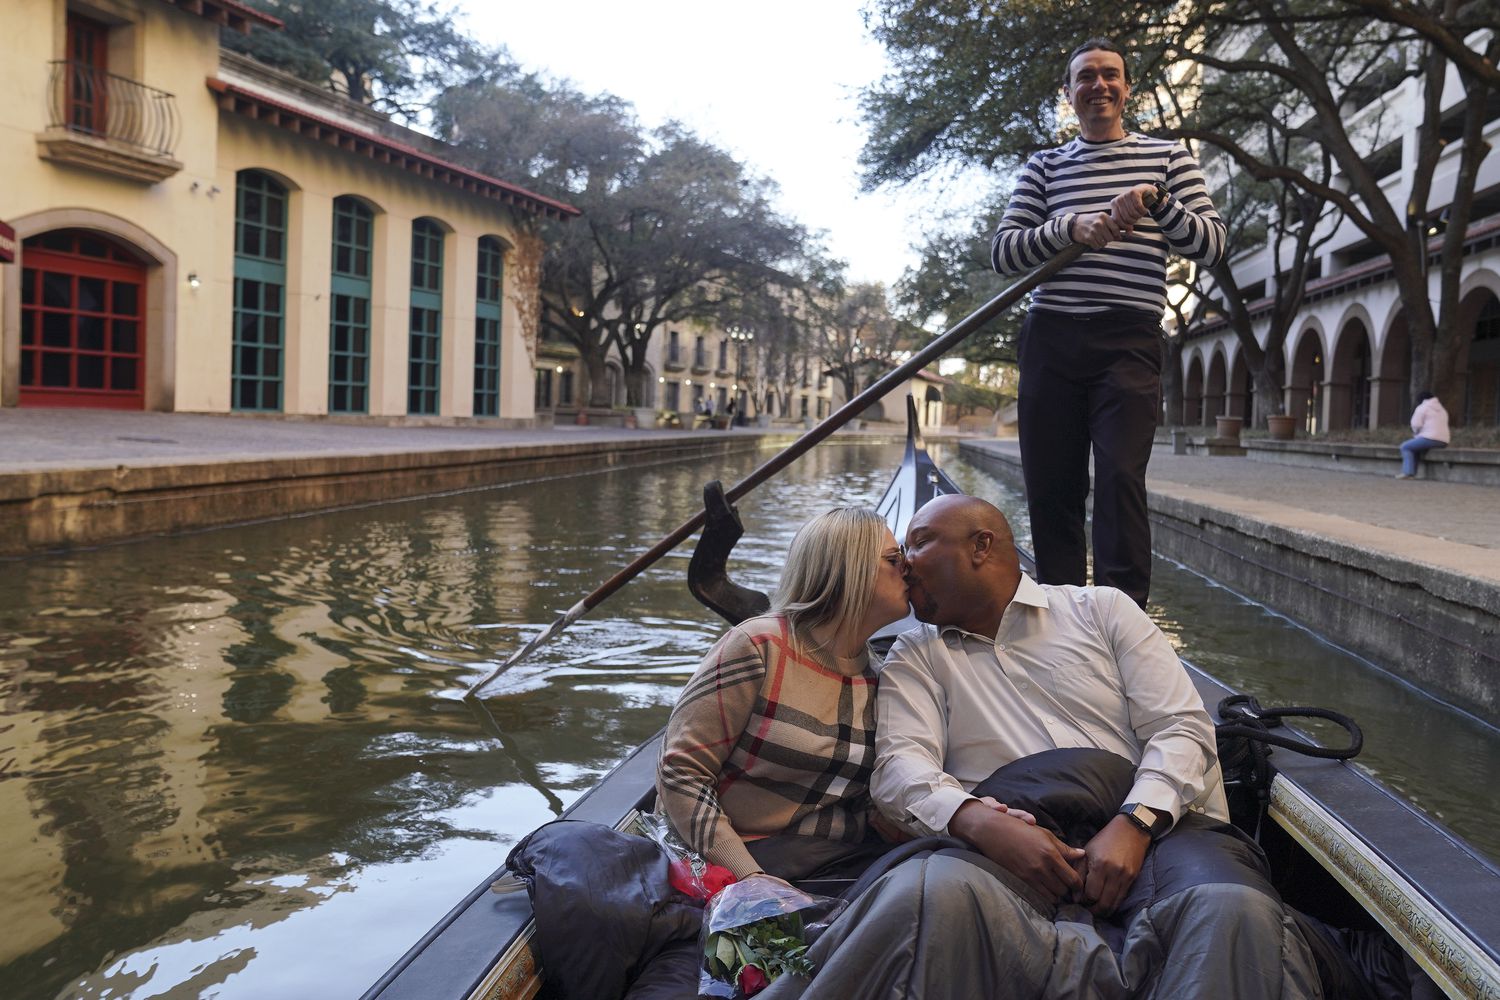 Enjoy a romantic gondola ride complete with a serenade and chocolates at Mandalay Canals in...